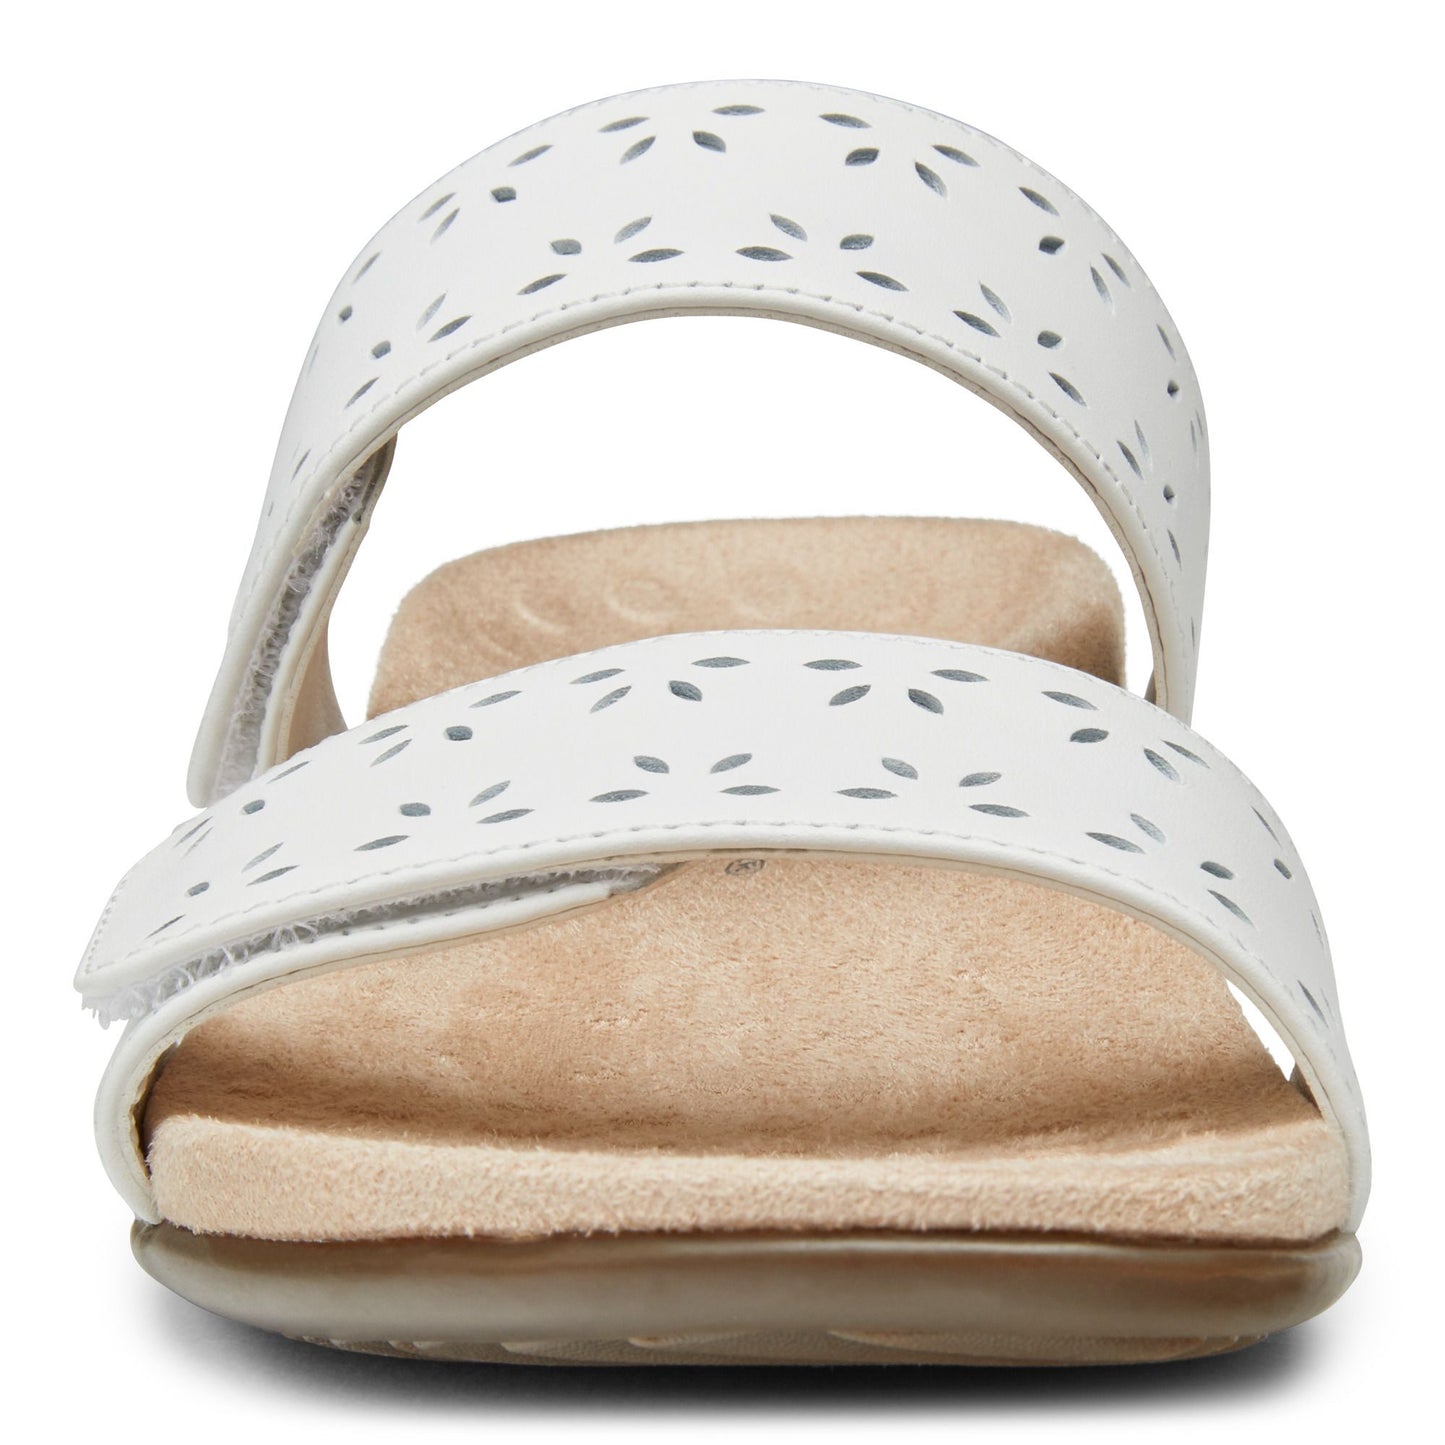 RANDI  WHITE LEATHER | Vionic Women's Rest Randi Slide Sandal - Adjustable Sandals with Concealed Orthotic Arch Support-Brandy